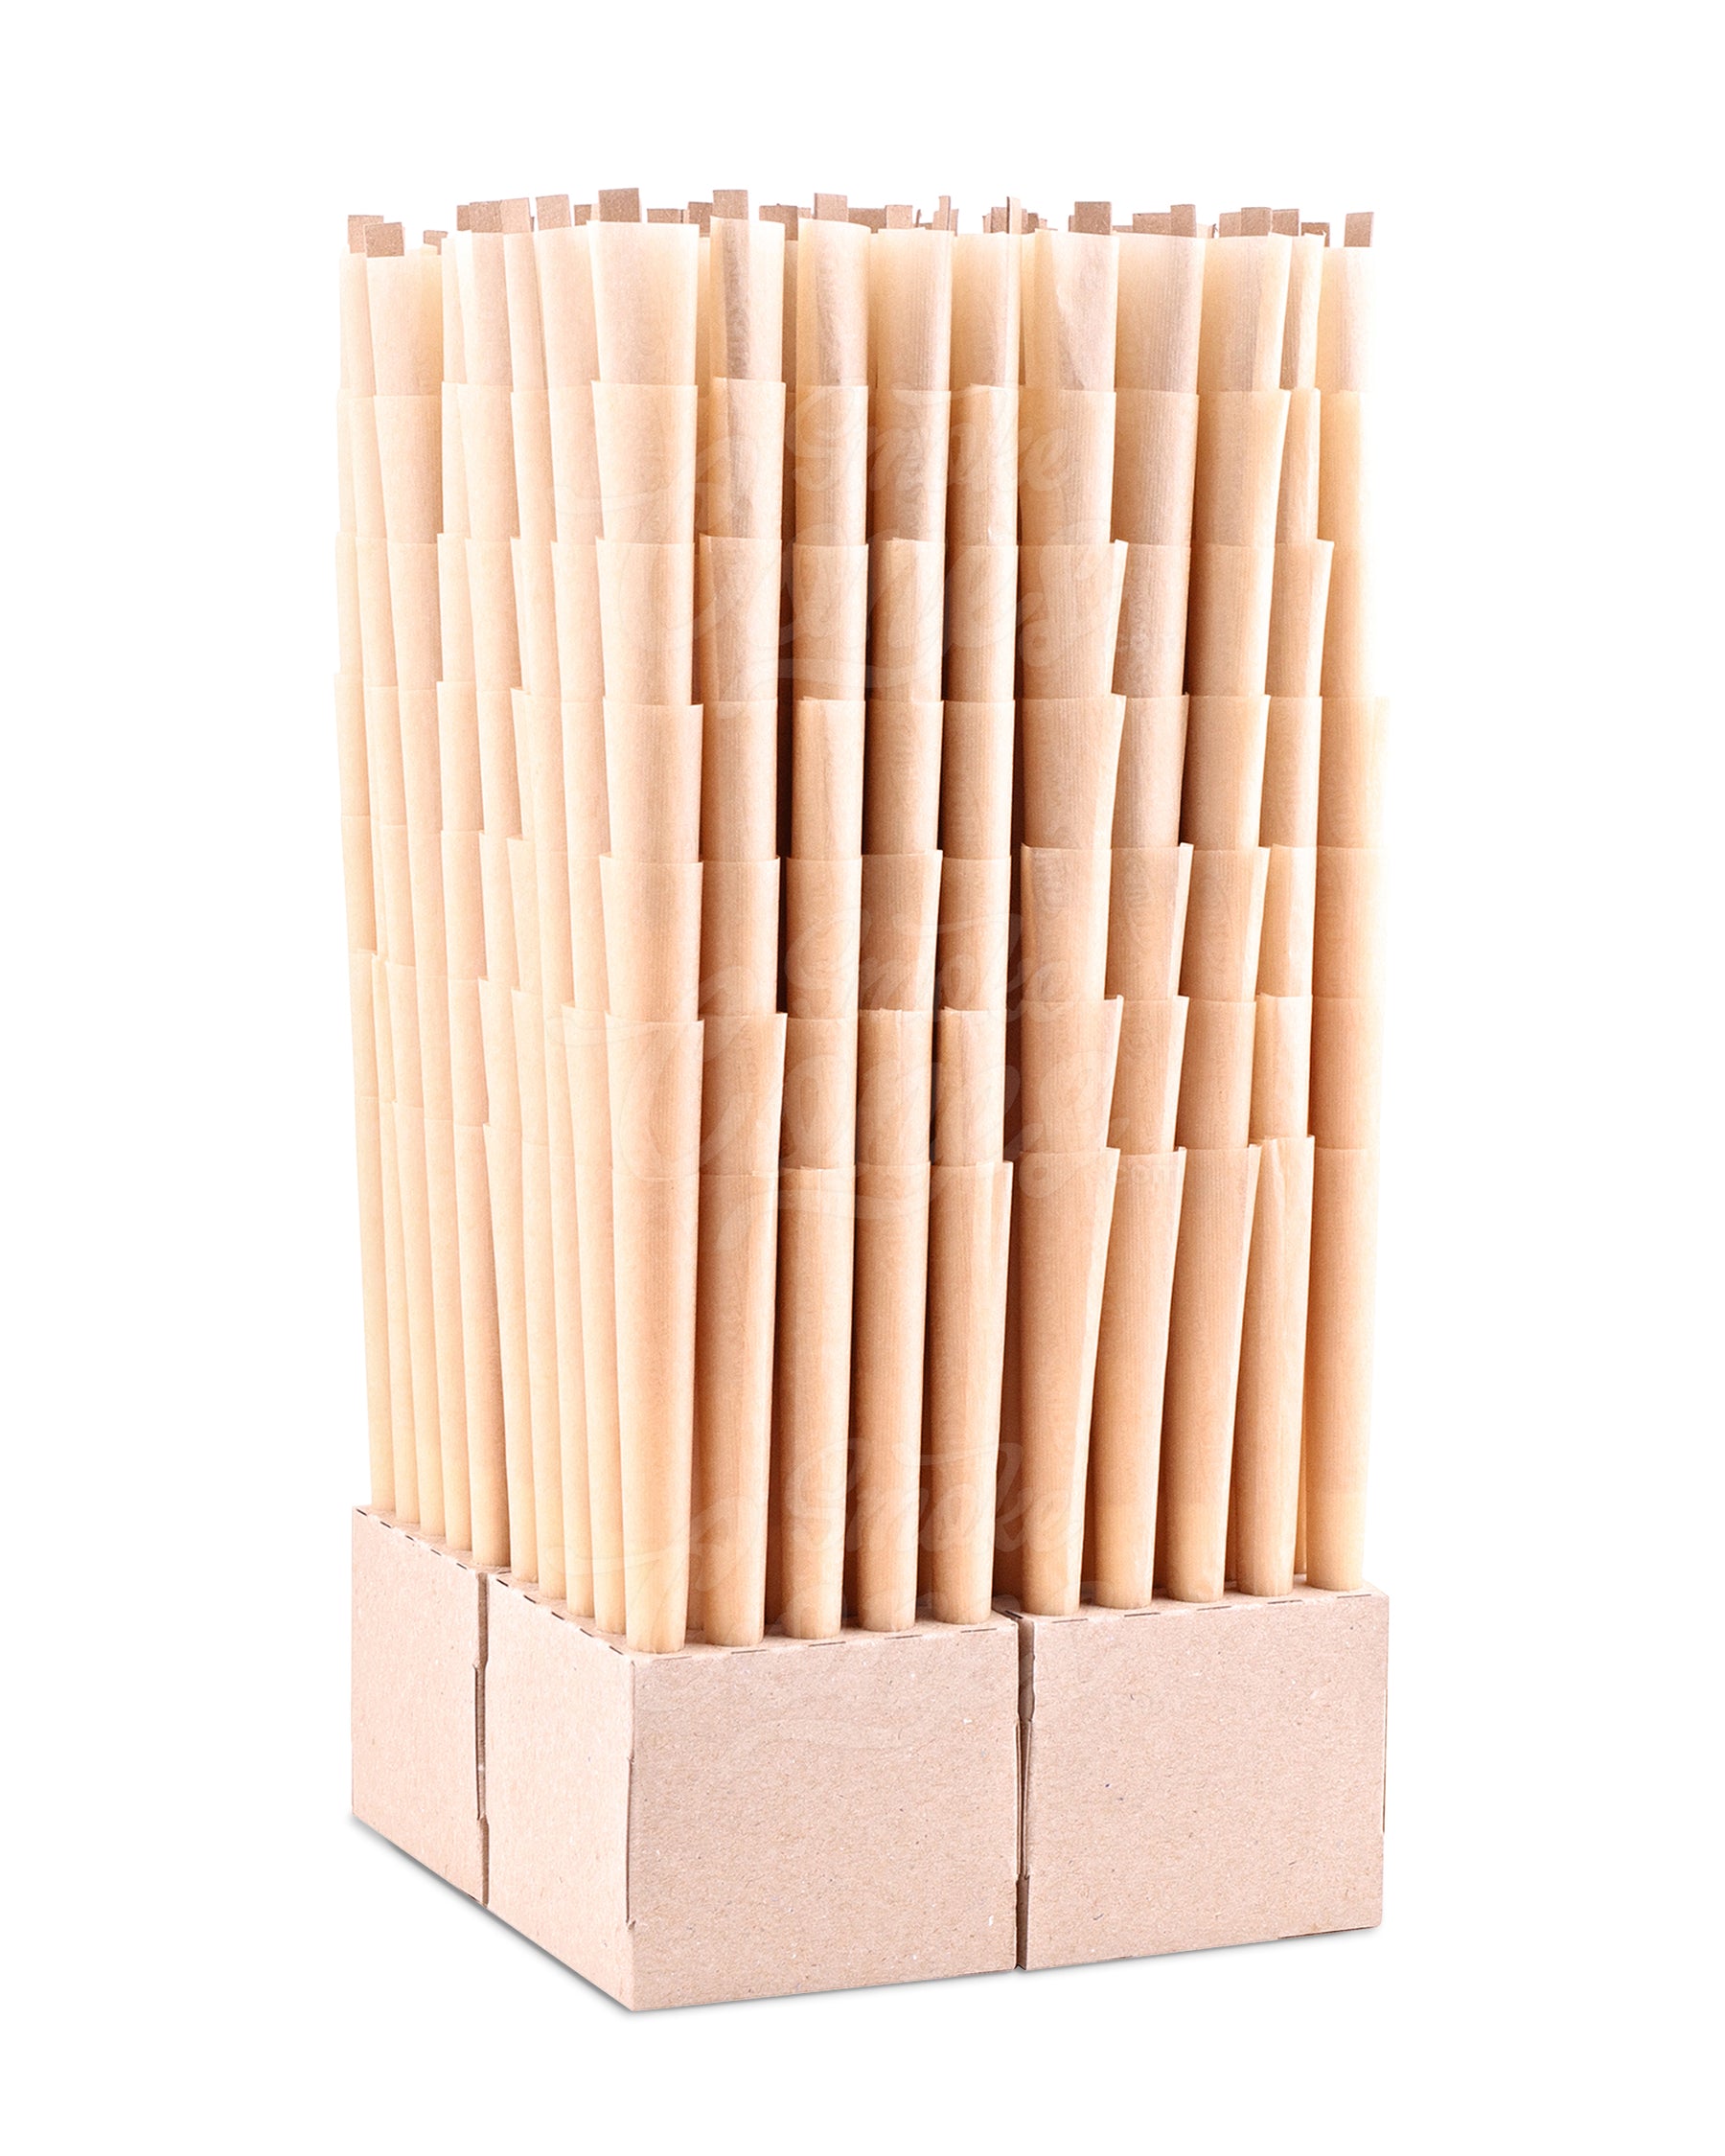 The Original Cones 140mm Party Size Unbleached Paper Pre Rolled Cones w/ Filter Tip 700/Box